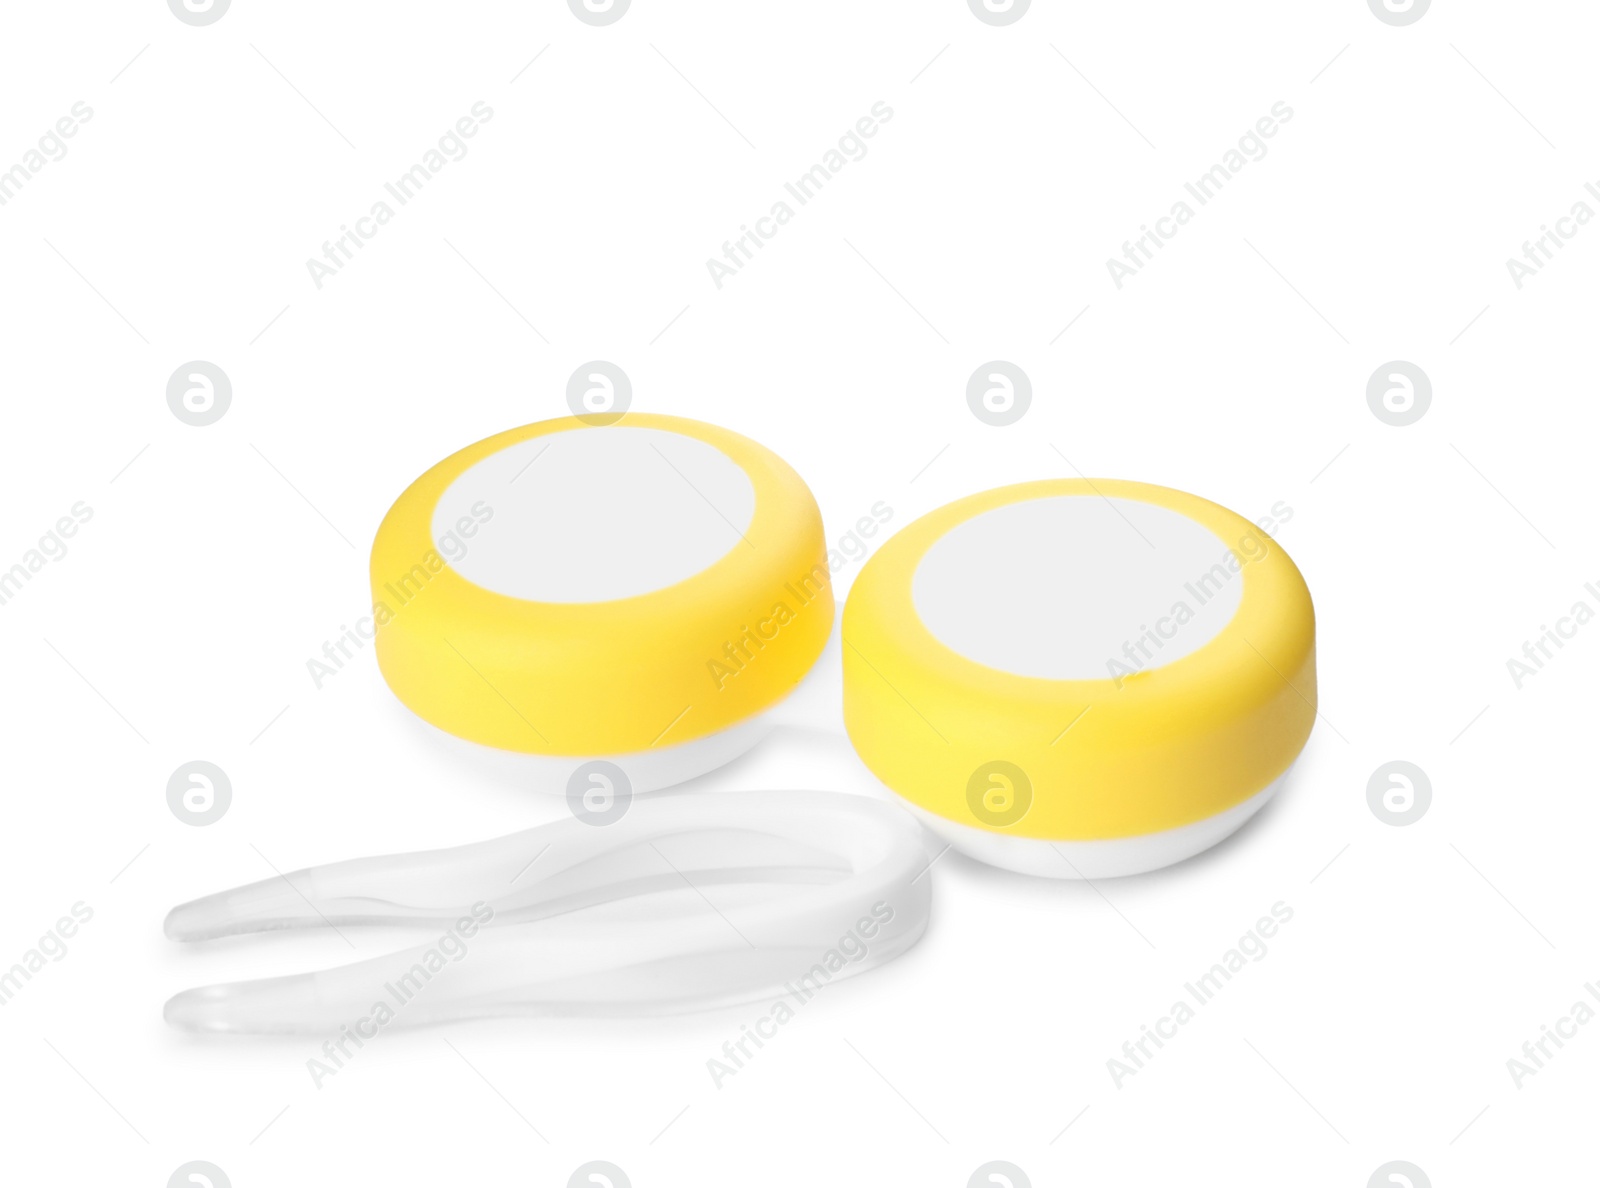 Photo of Container with contact lenses and tweezers on white background. Medical item